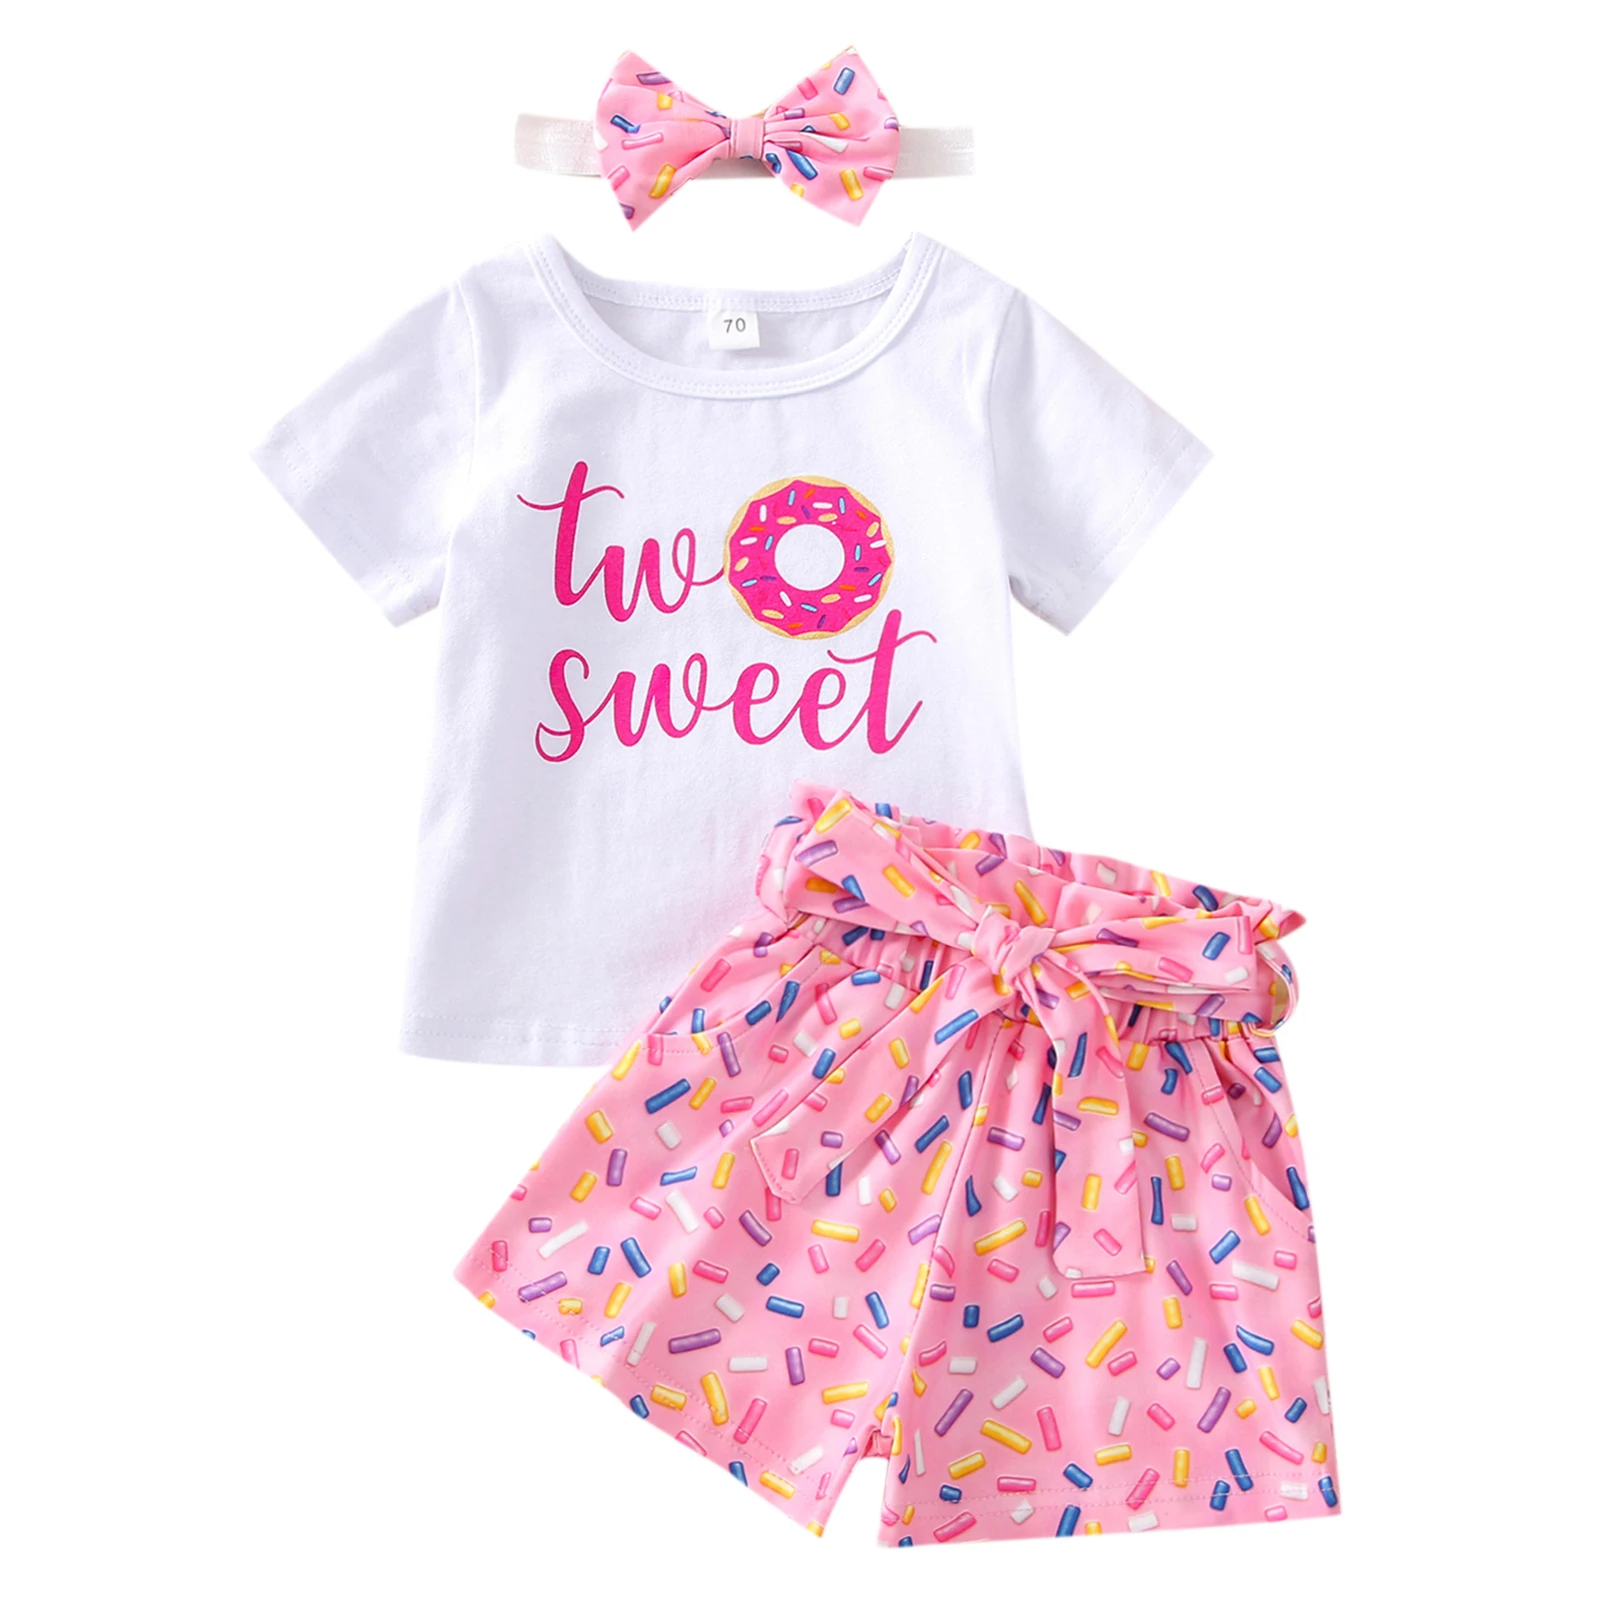 Ma&Baby 18-30M Newborn Infant Baby Girl Clothes Set Donut Print Letter T-shirt  Flare Pants 2 Years Birthday Outfit Costumes D35 baby's complete set of clothing